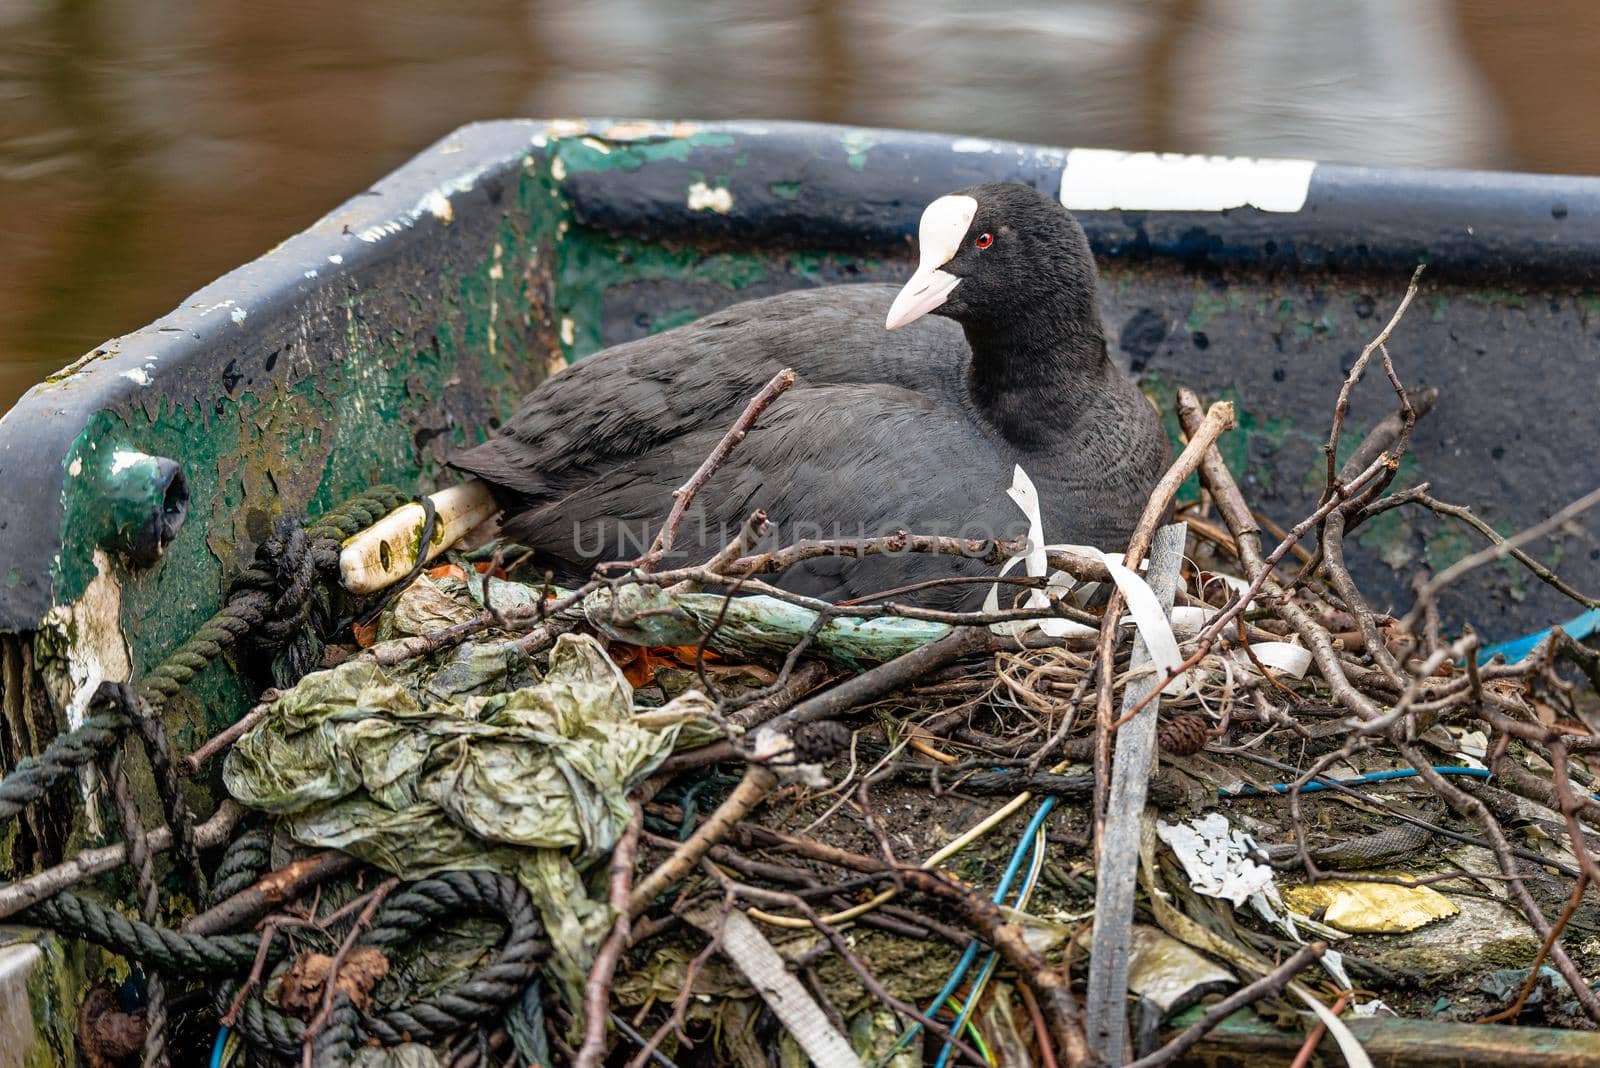 Eurasian Coot (Fulica atra) nest on an abandoned boat, Amsterdam canal.